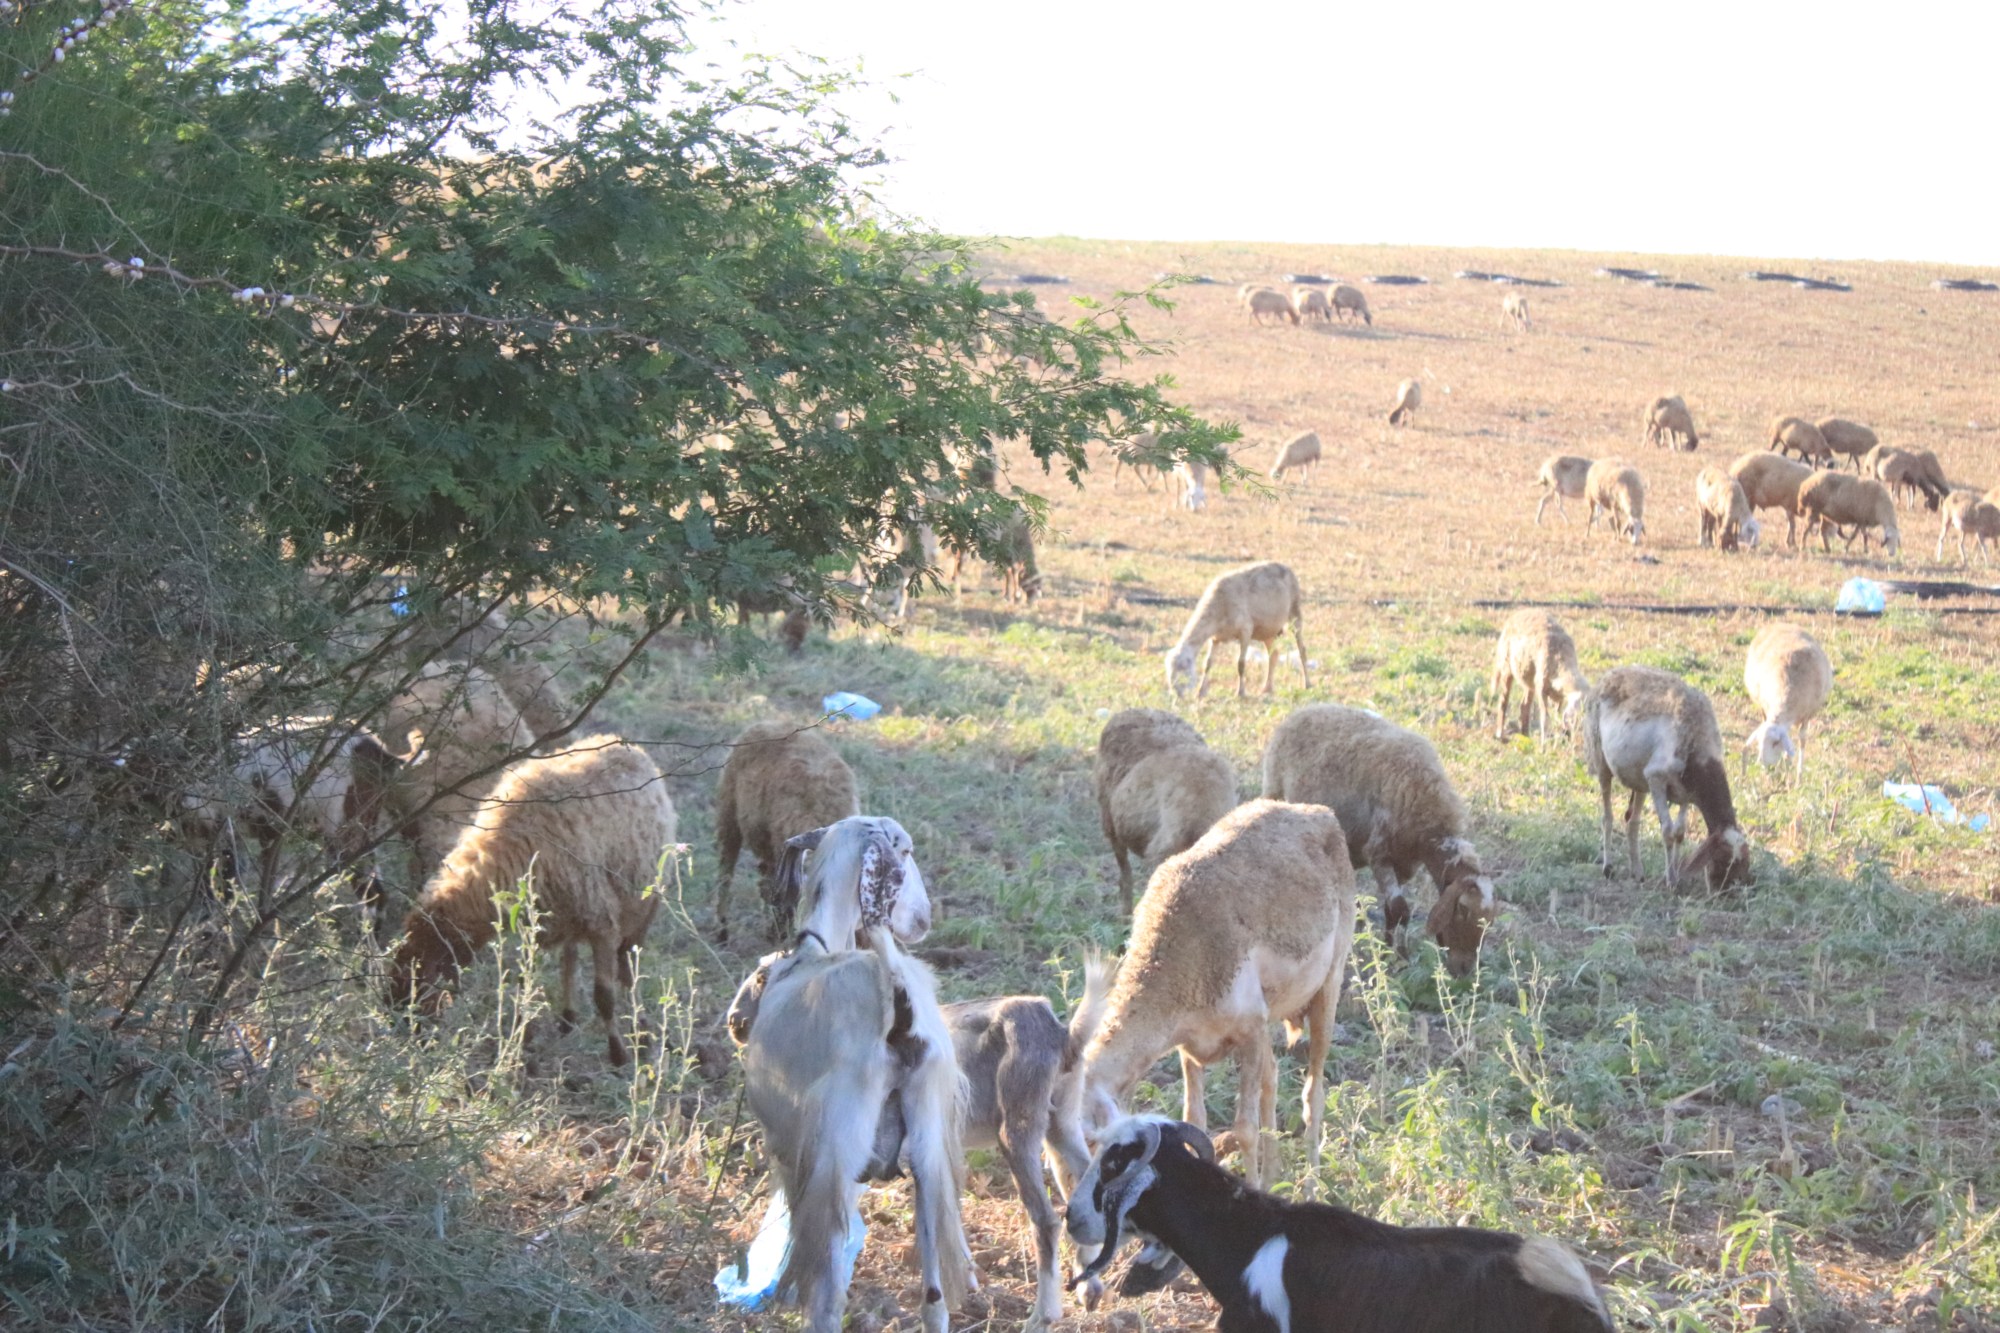 The herbicides not only hurt crops, but also livestock grazing in the affected areas (MEE/Abdallh al-Naamy)